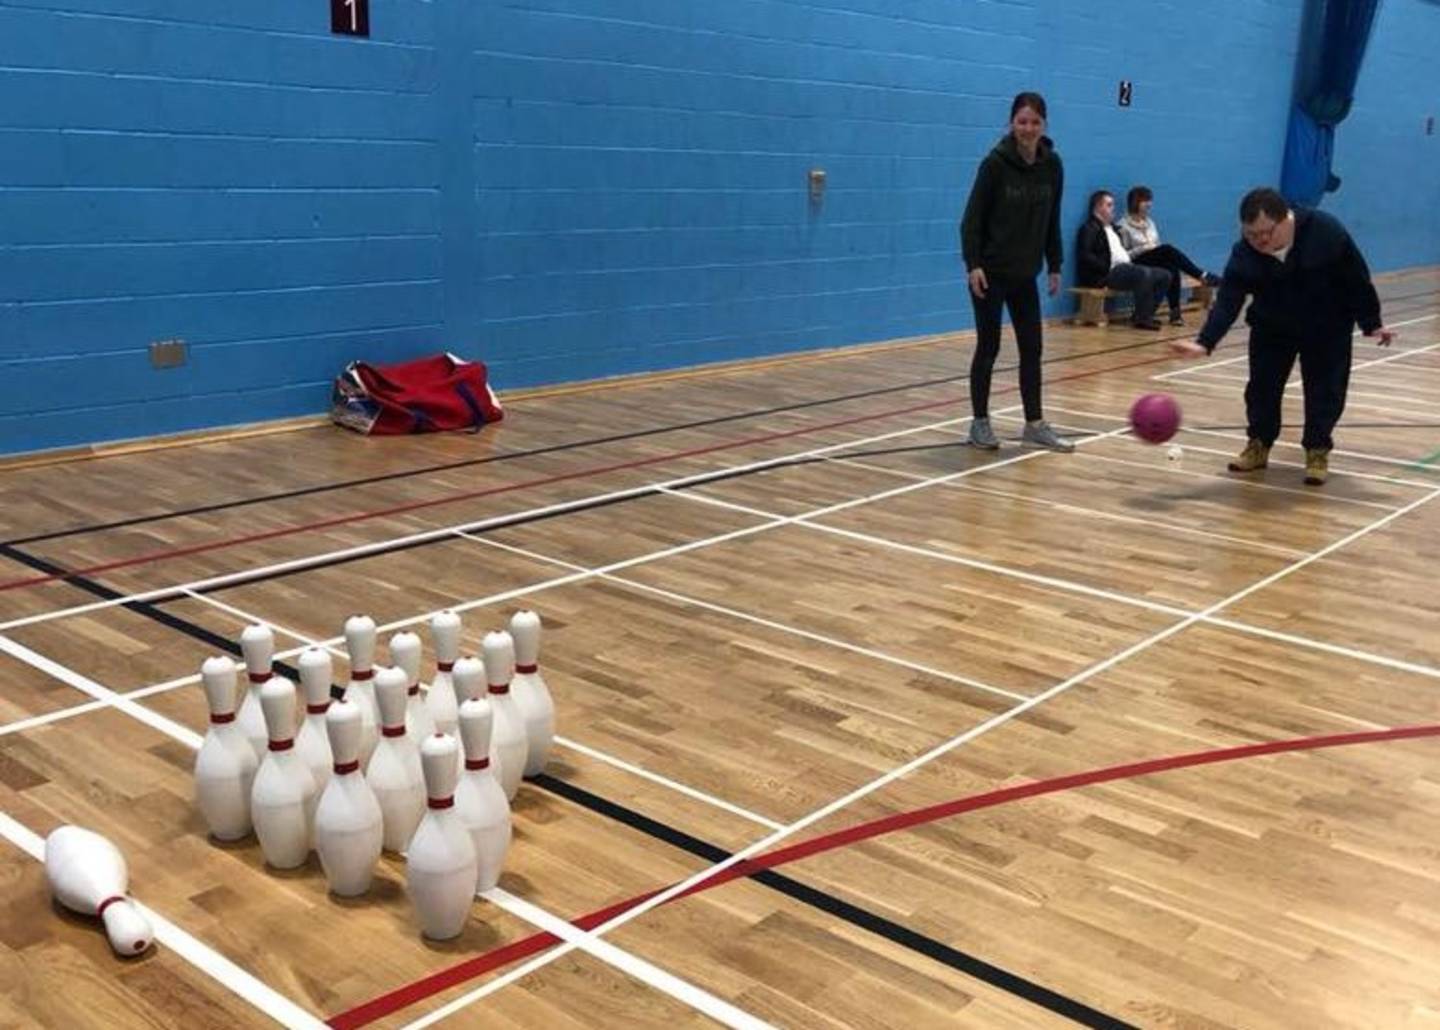 Boy playing skittles in sports hall